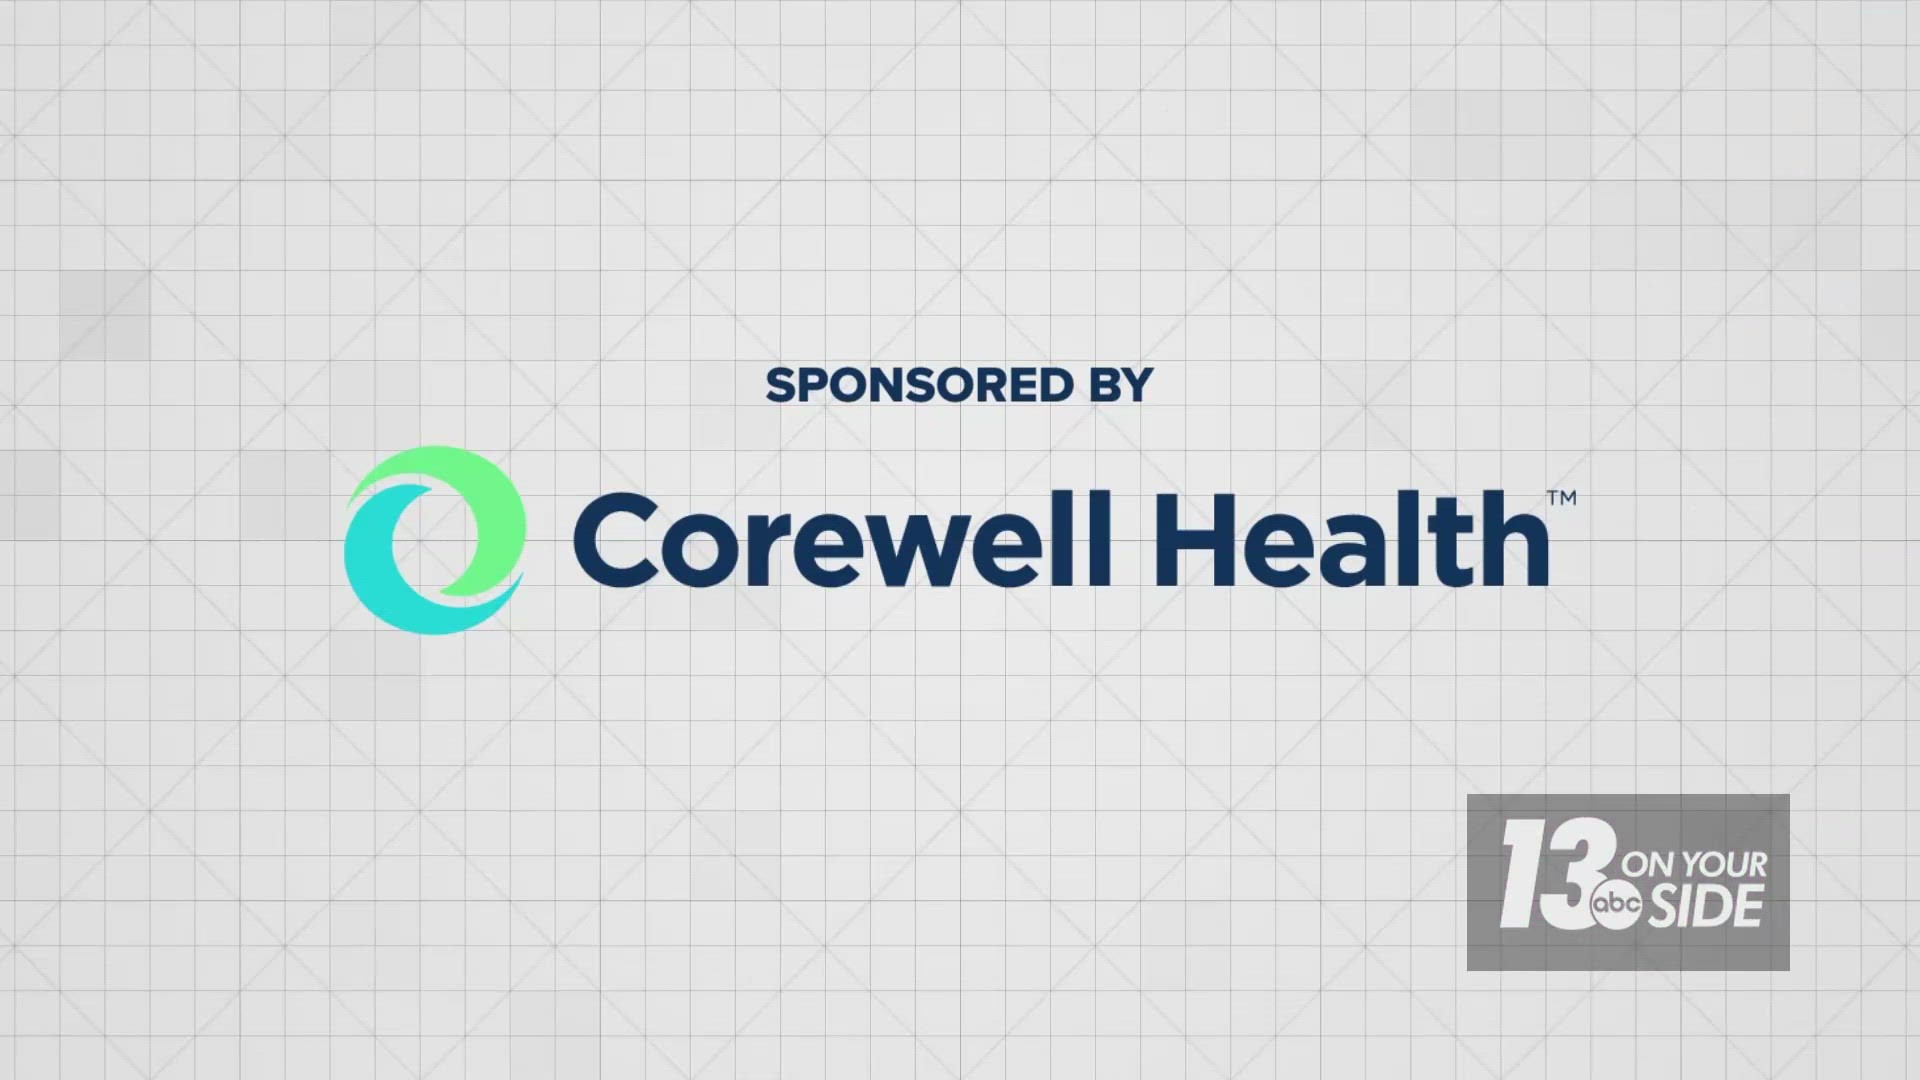 Dr. Ben Kieff is a gastroenterologist with Corewell Health and he joined us to discuss why Colorectal Cancer seems to be affecting younger people.